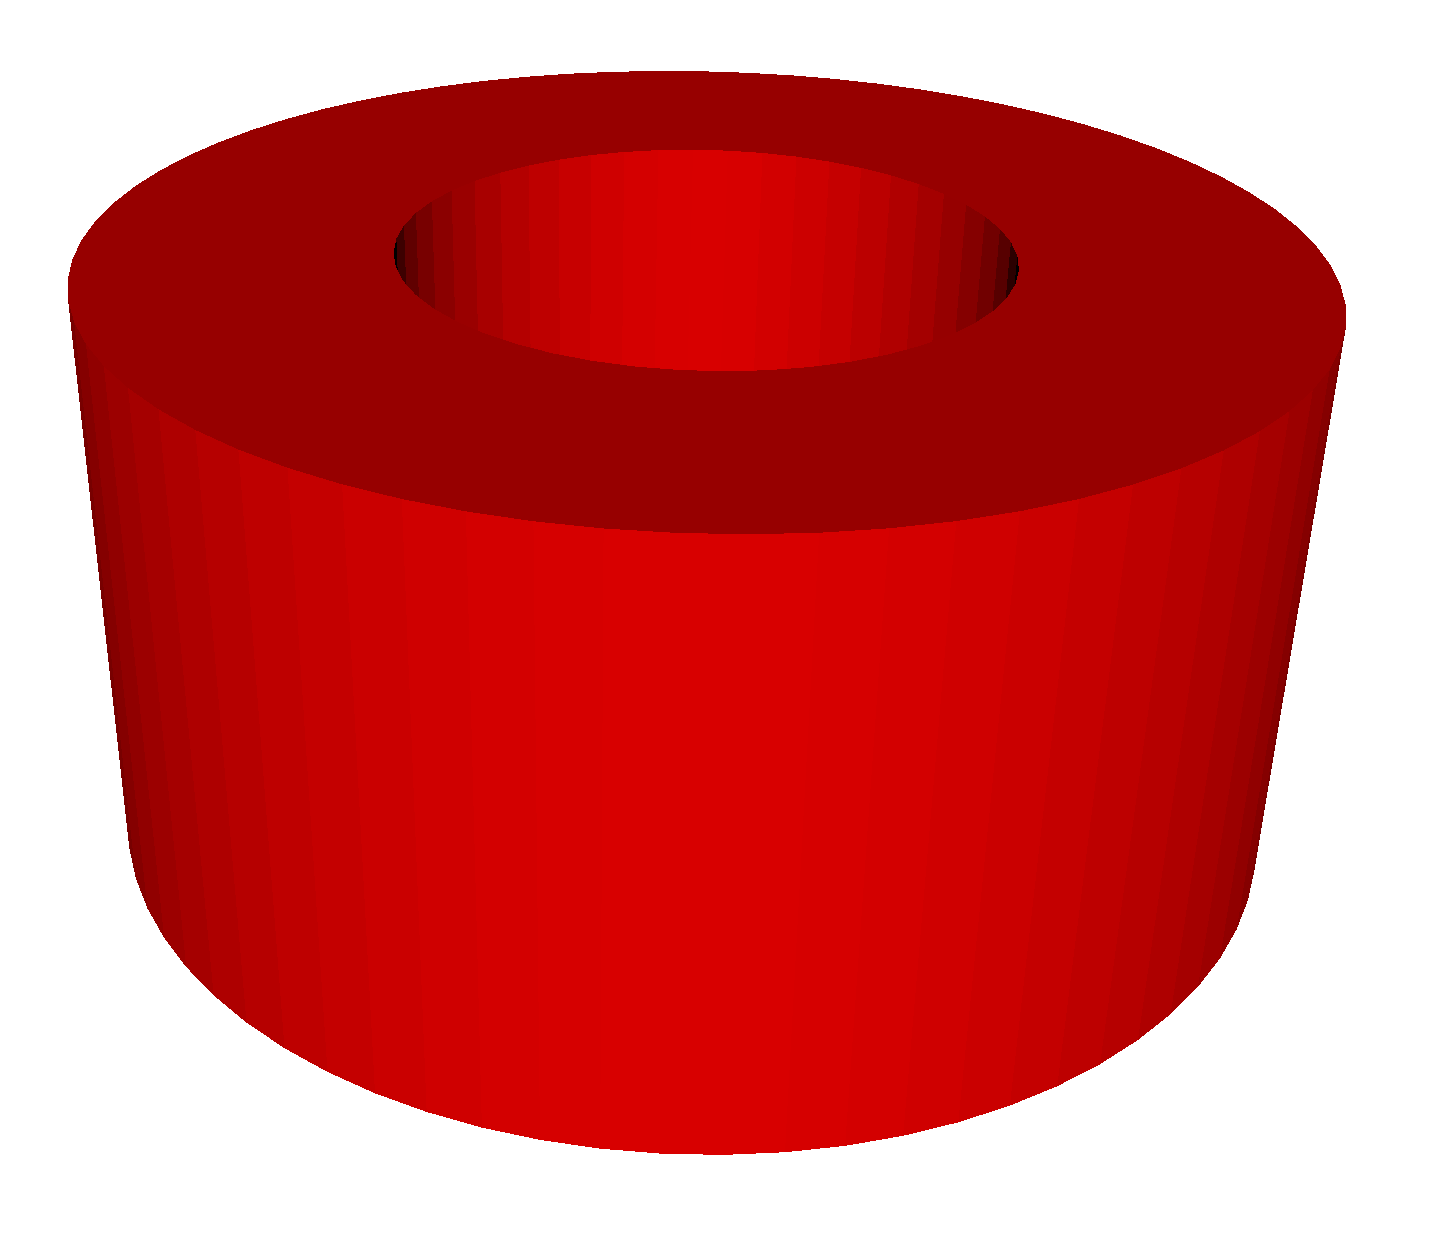 3D model of a cylinder with a circular hole along its height